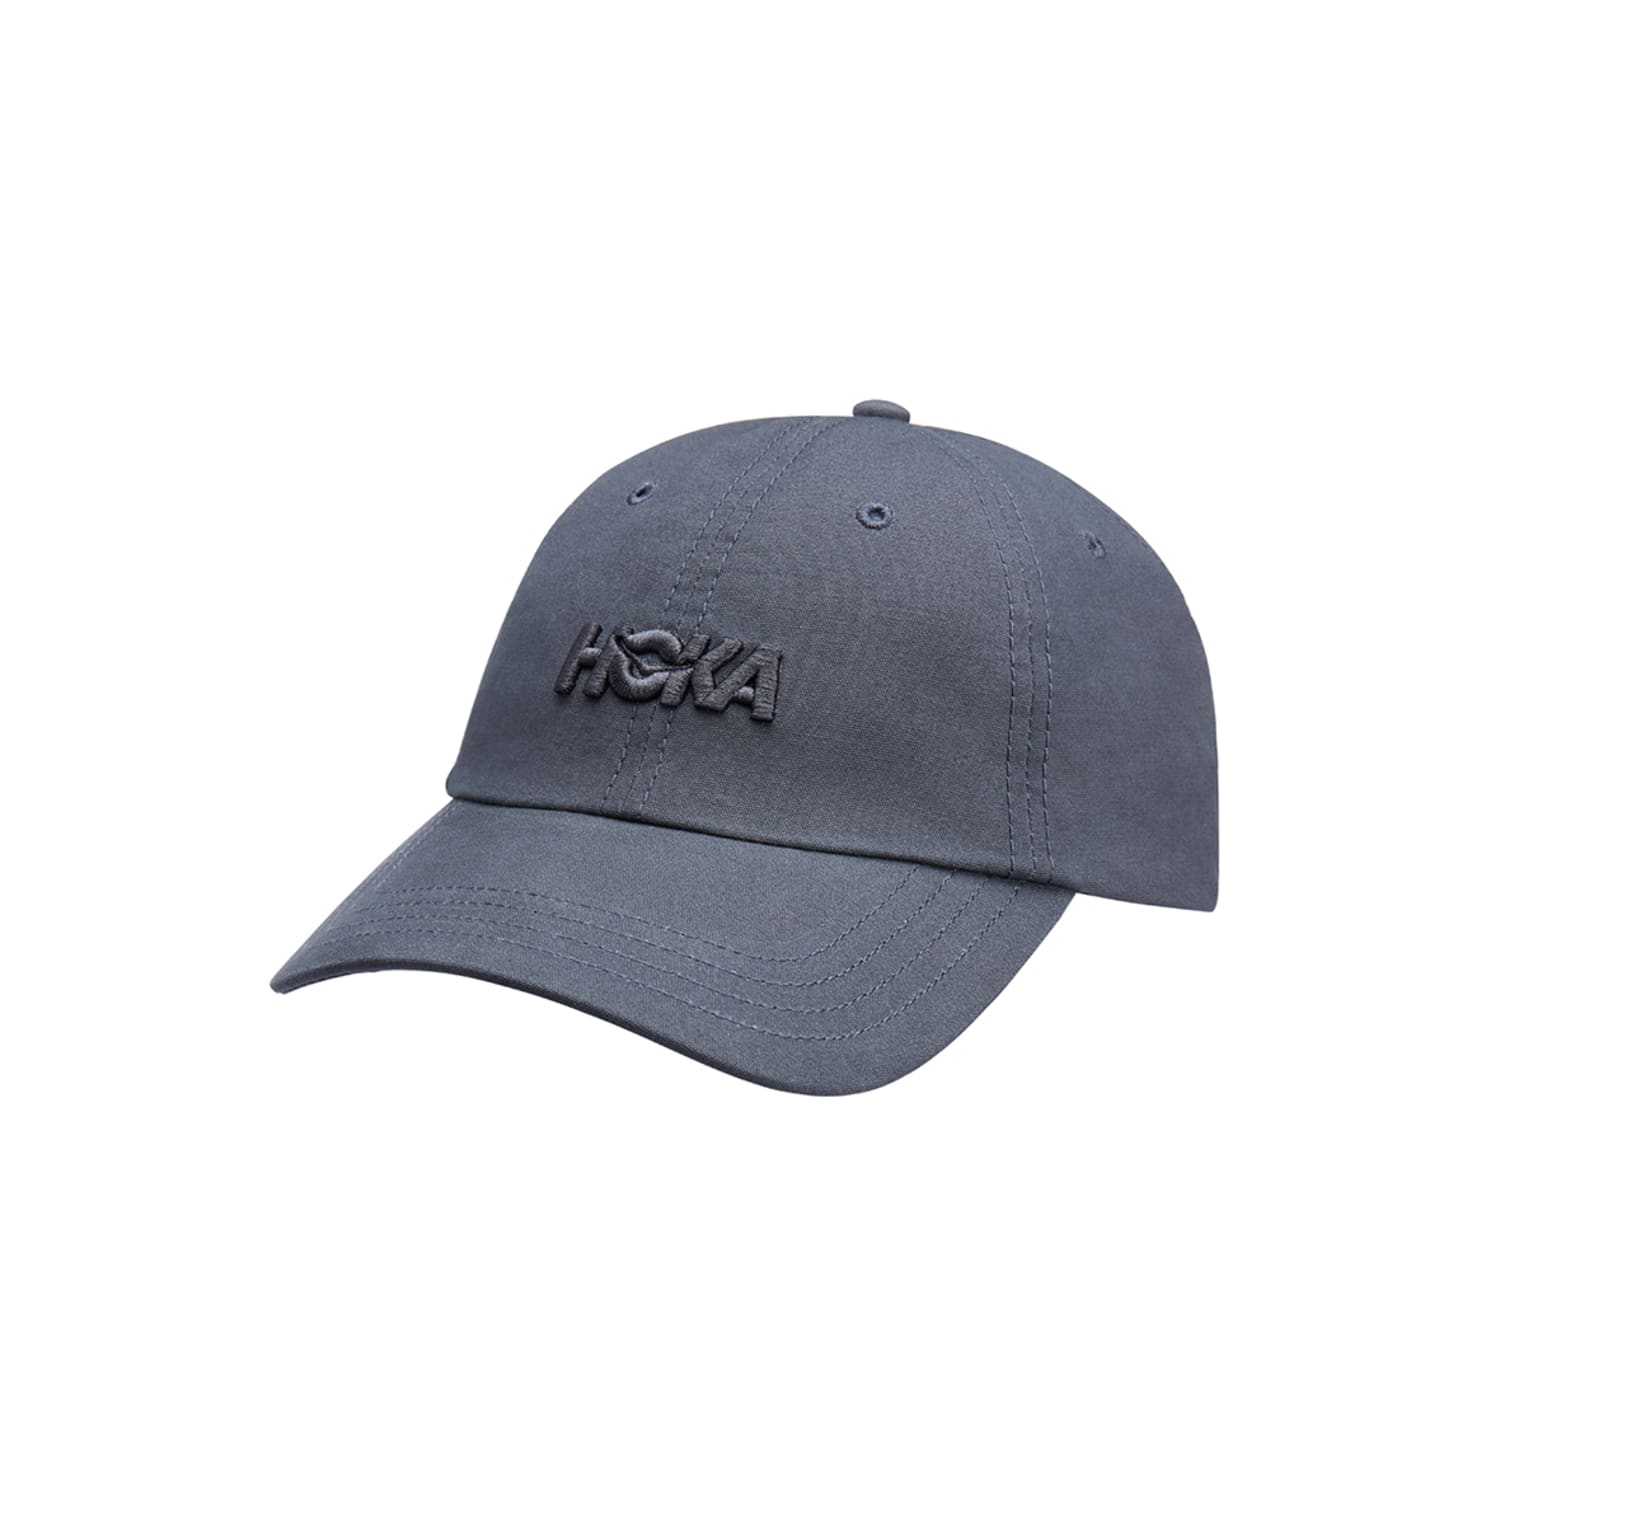 All Gender UNISEX CASUAL HAT